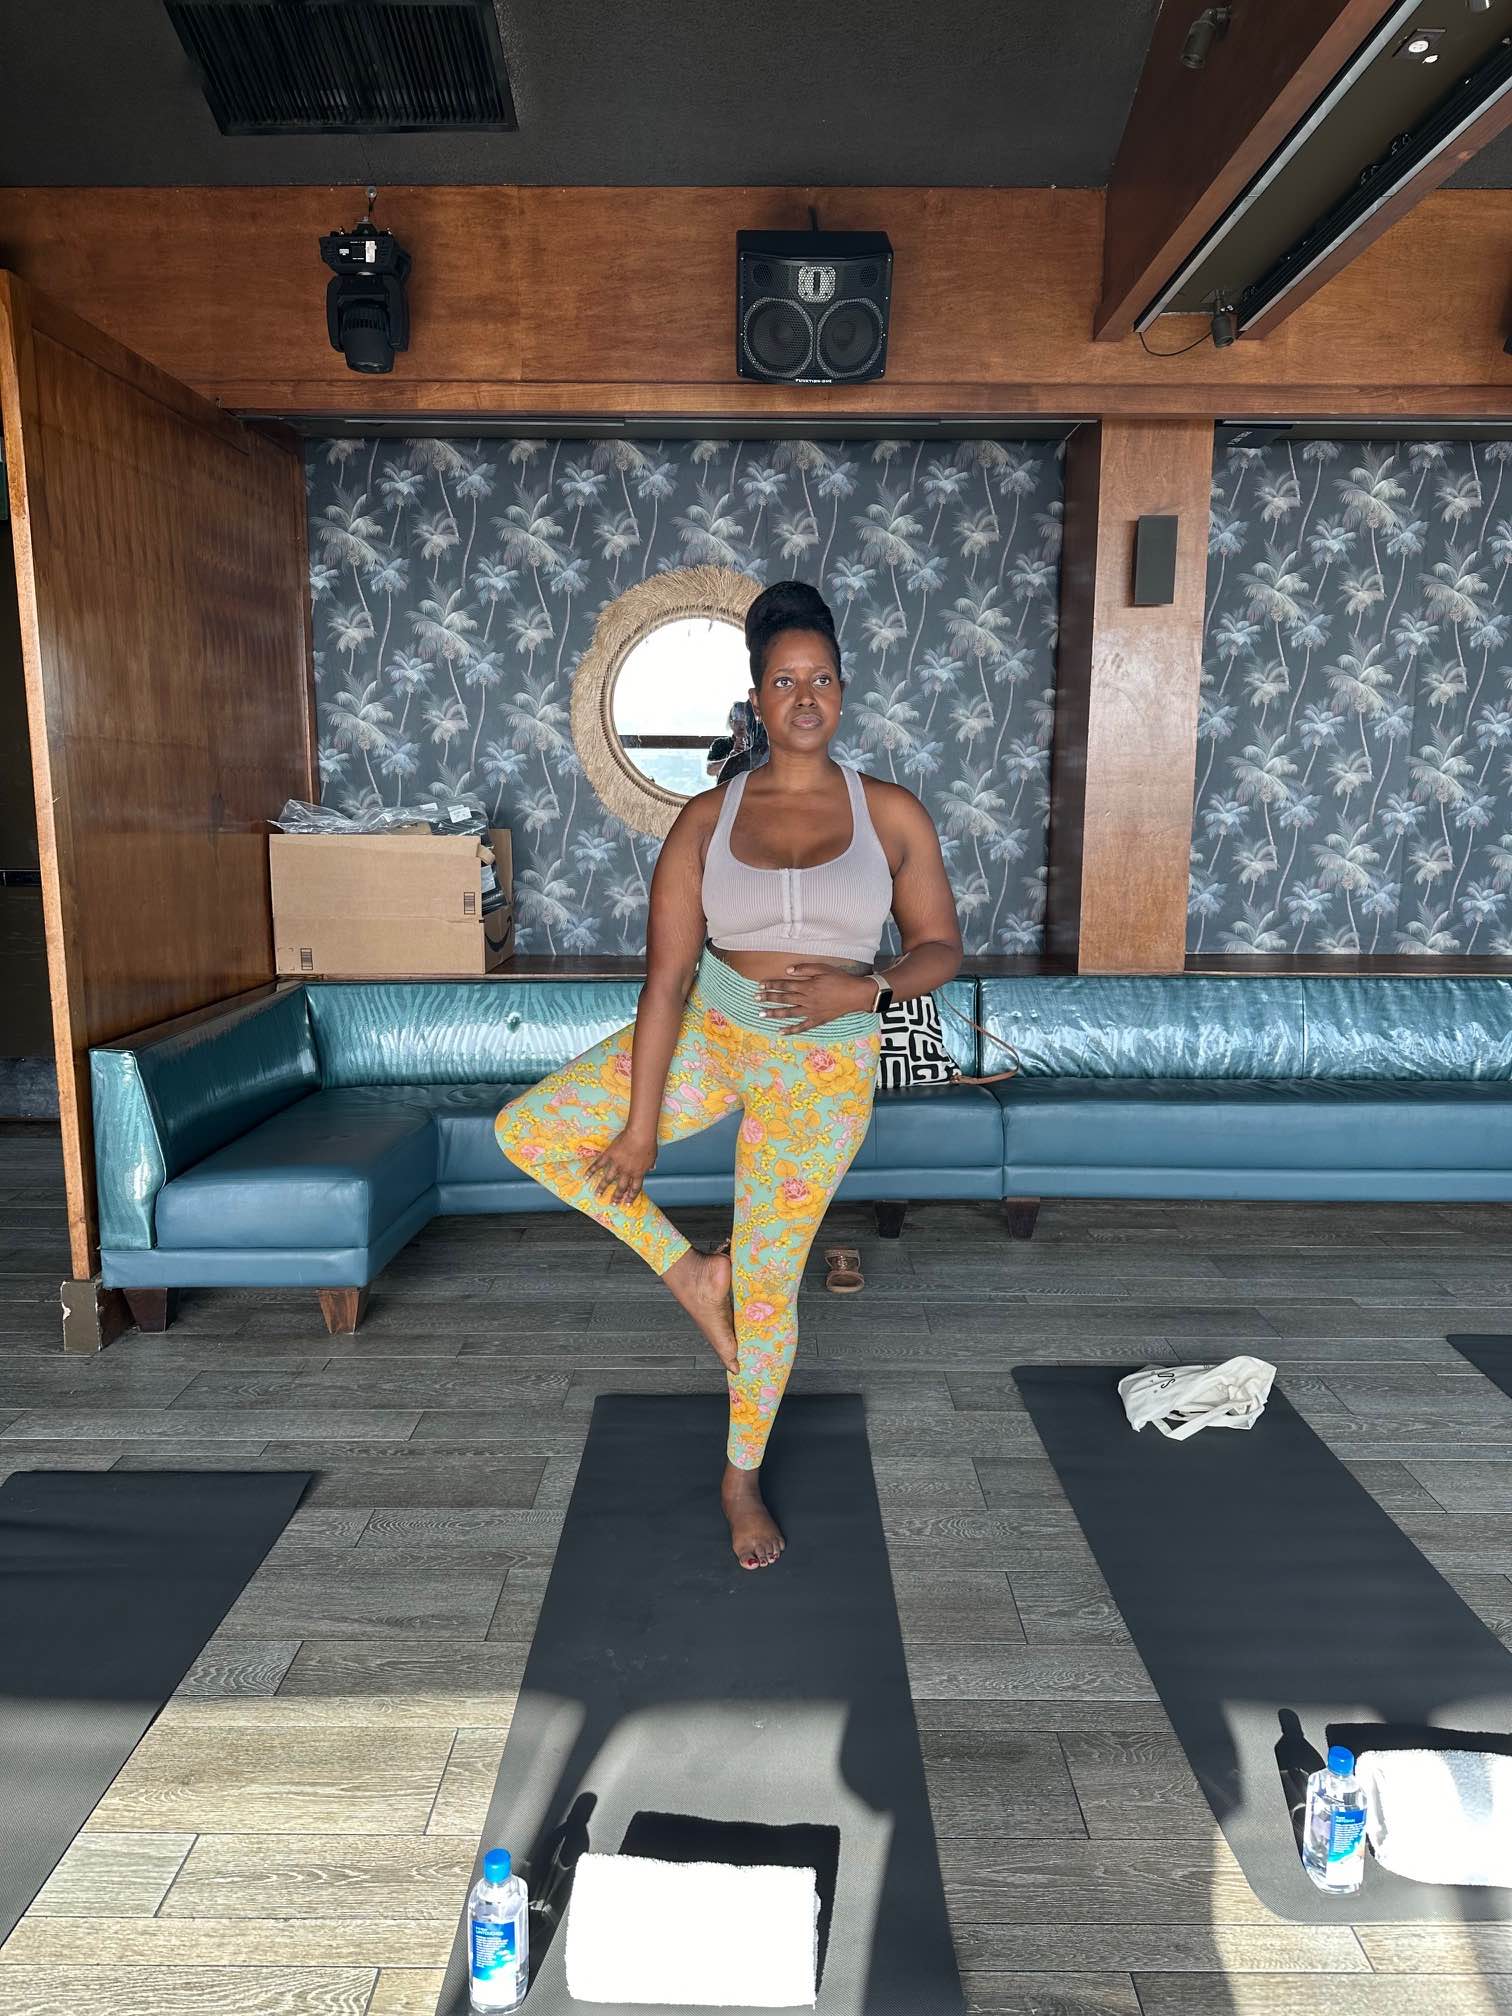 An image of lifestyle blogger Ariel in a yoga pose before she partook in a sound bath meditation.